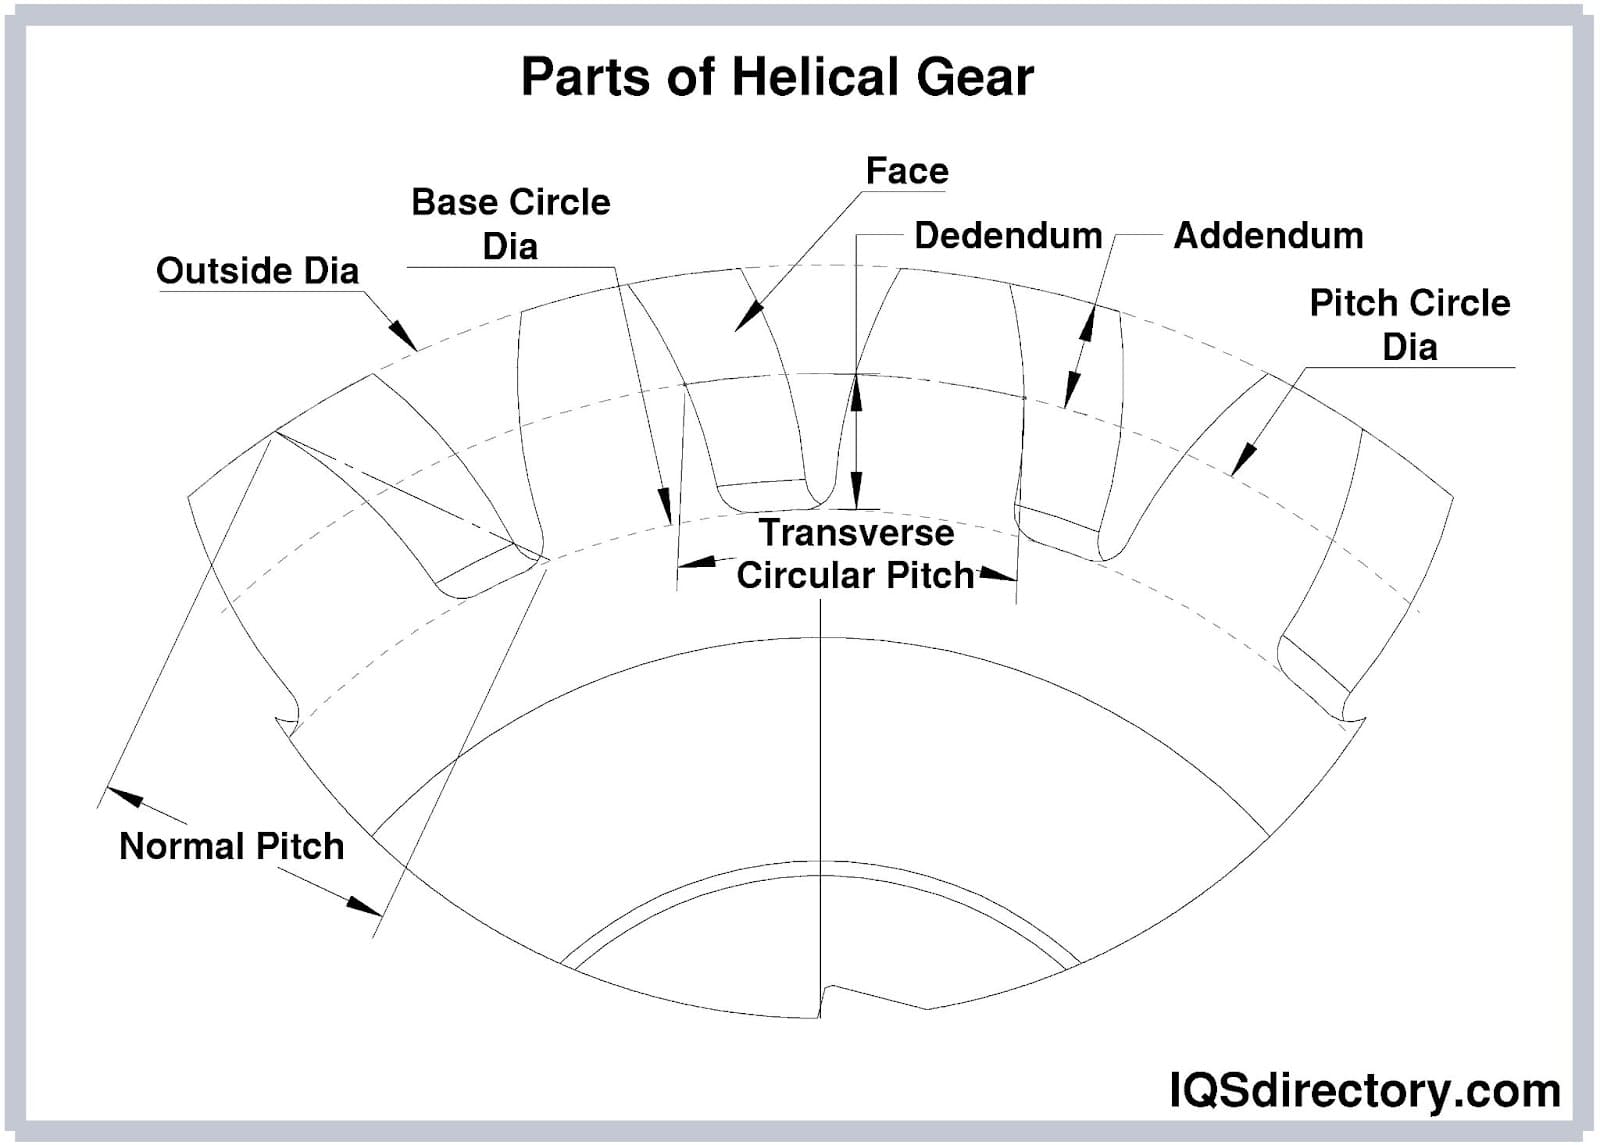 Parts of Helical Gear